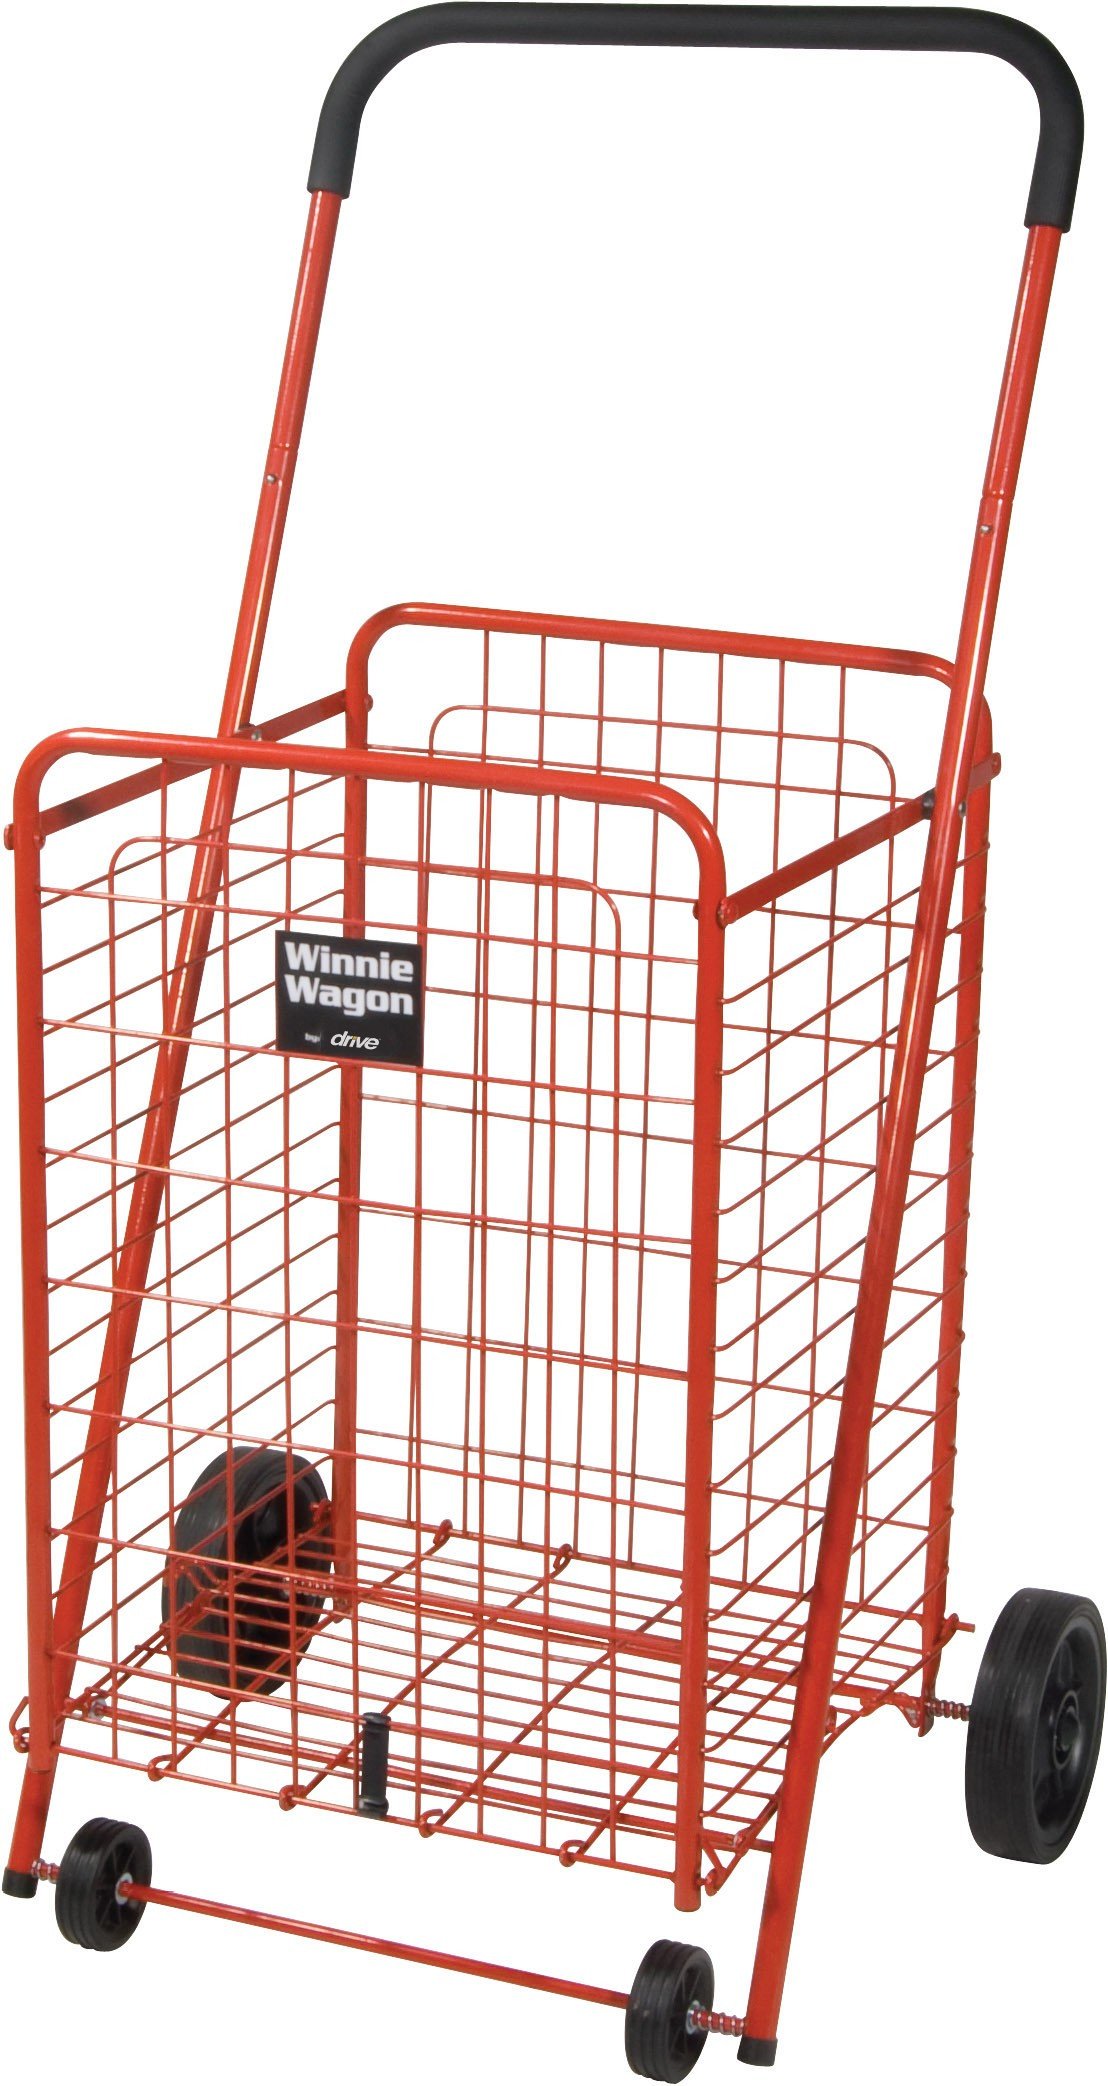 Winnie Wagon with Adjustable Height Handle - Red